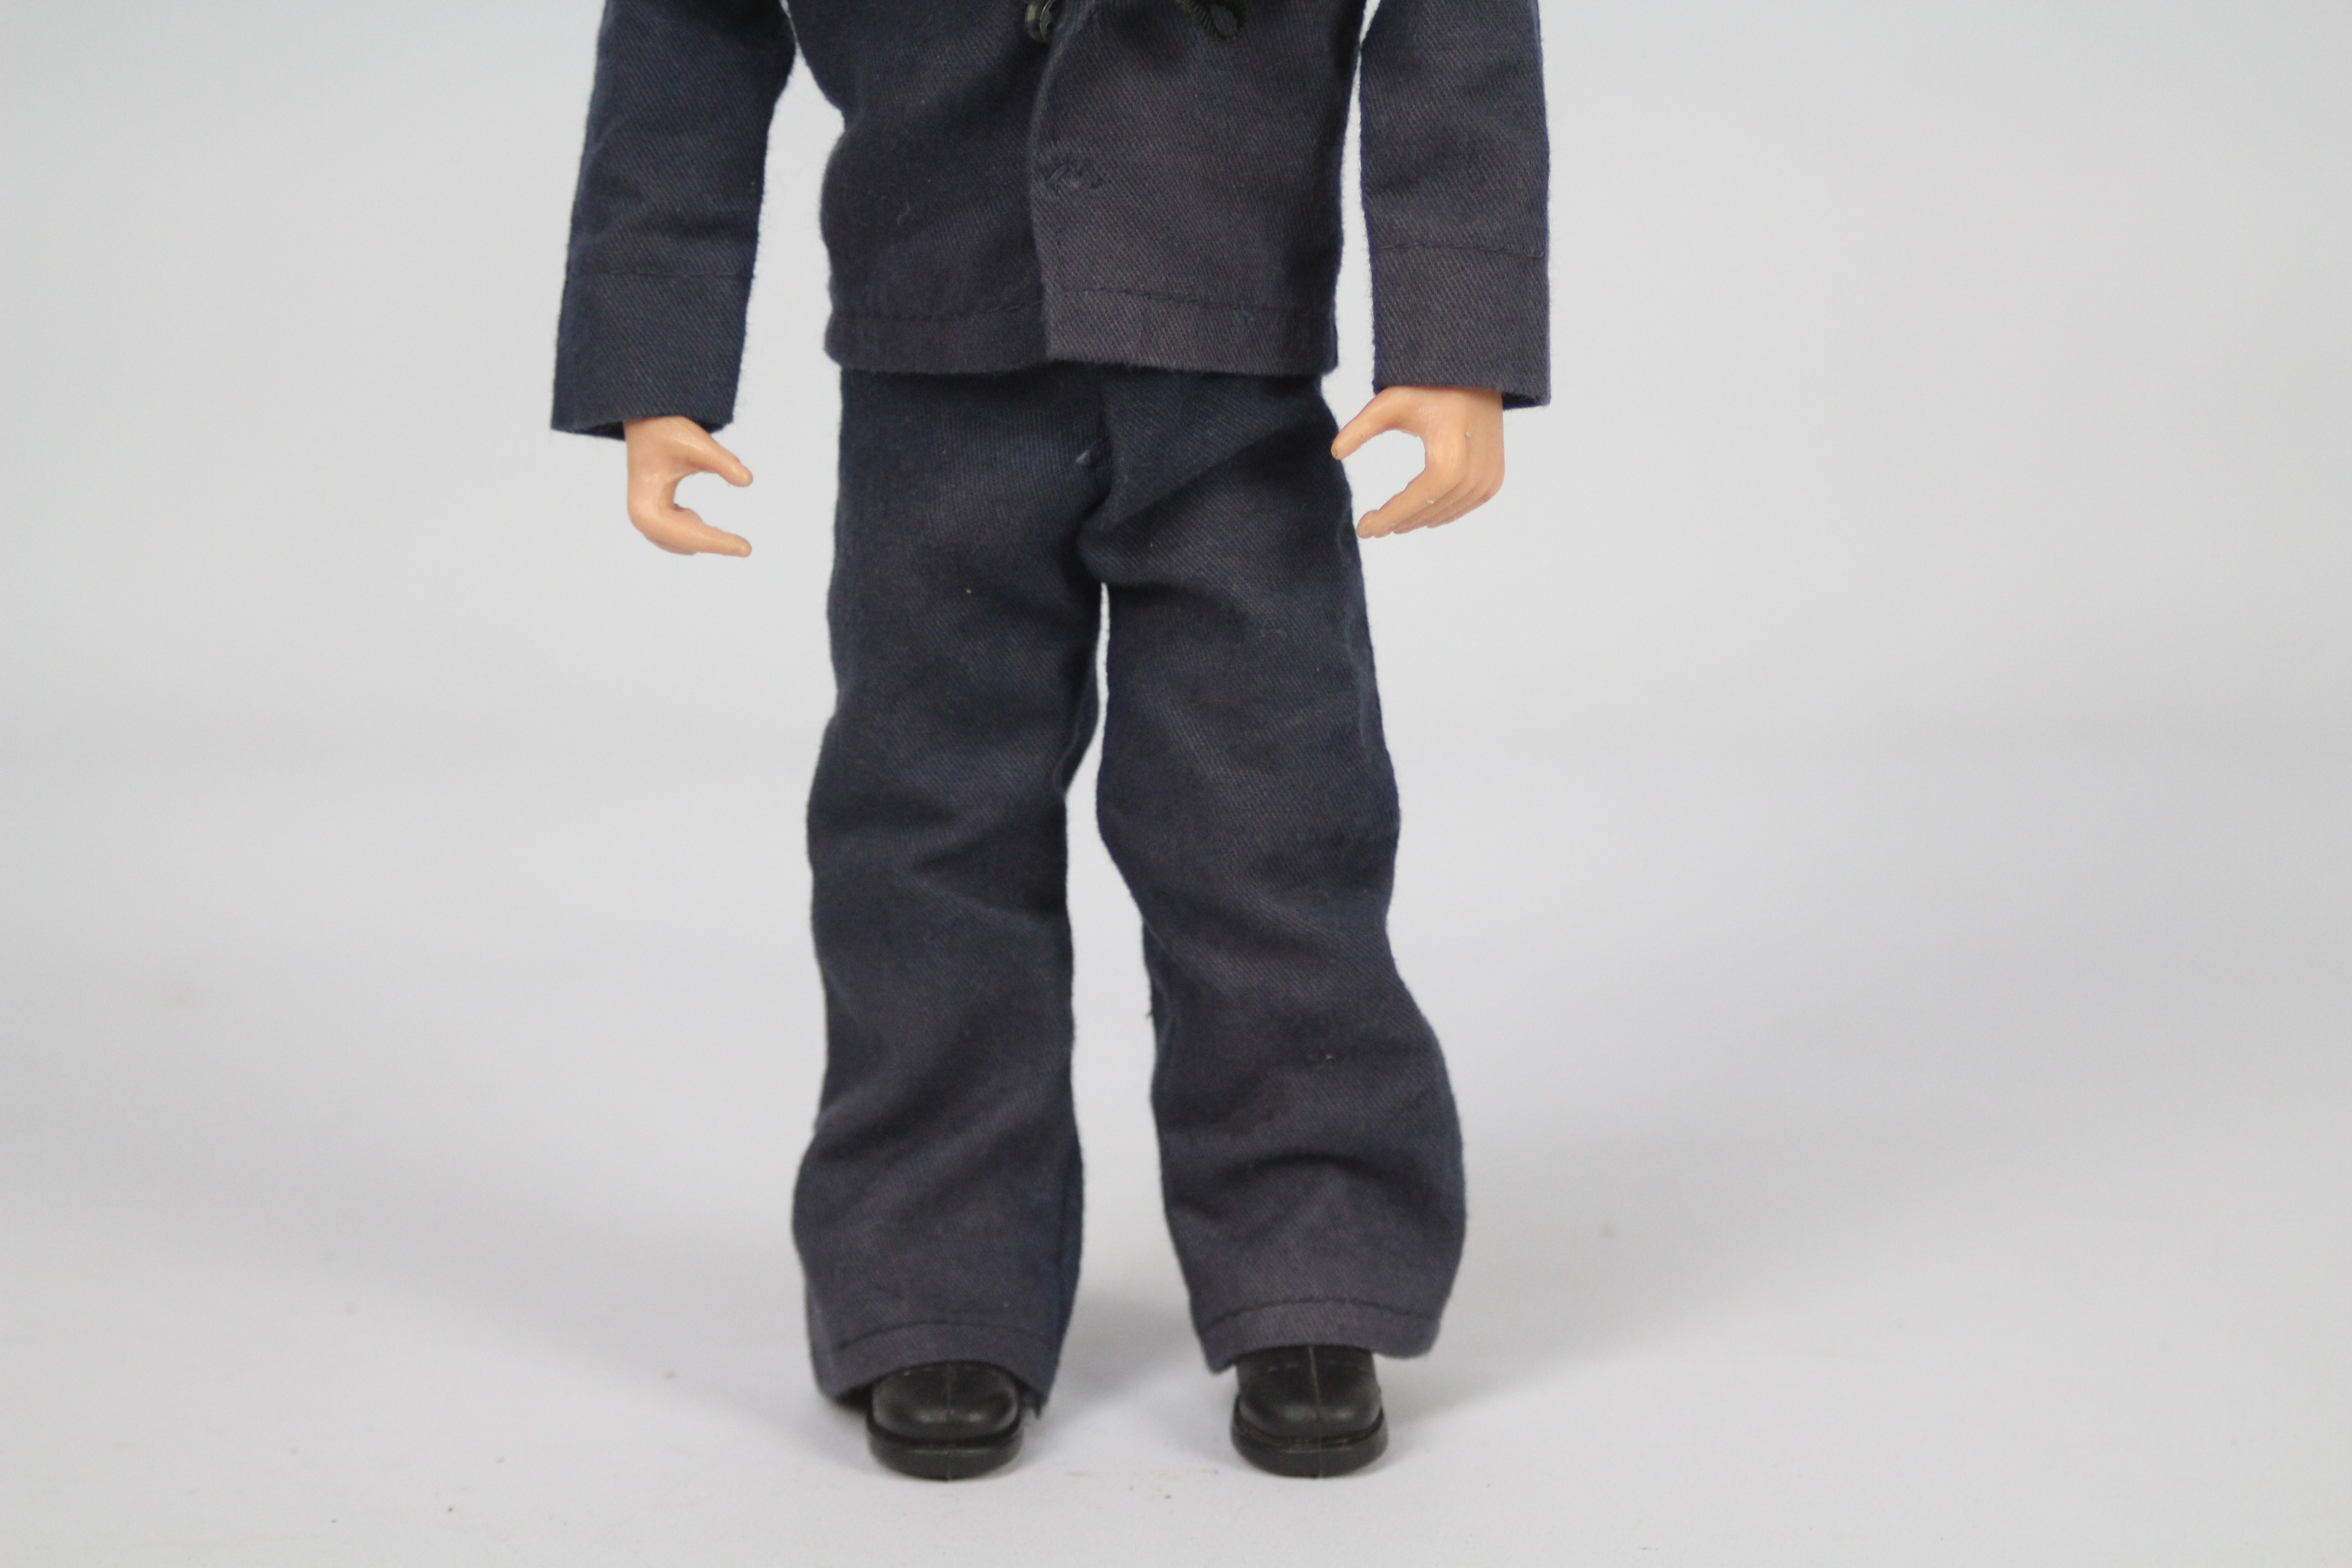 Palitoy, Action Man - A Palitoy Action Man figure in Sailor outfit. - Image 5 of 9